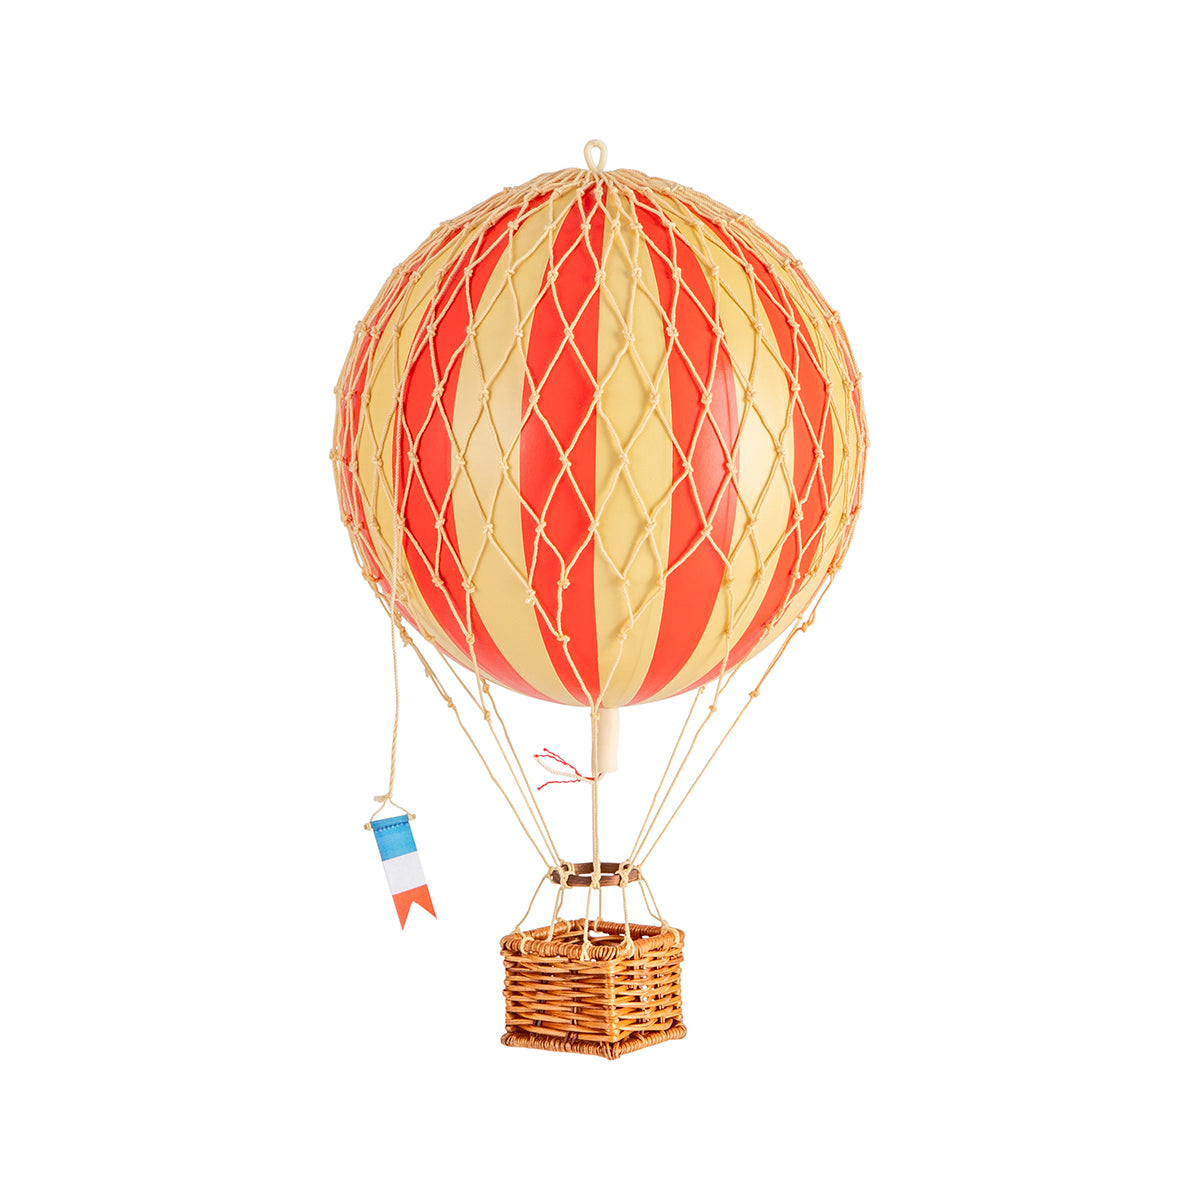 A Wonderen Small Hot Air Balloon - Travels Light with a quirky basket attached.